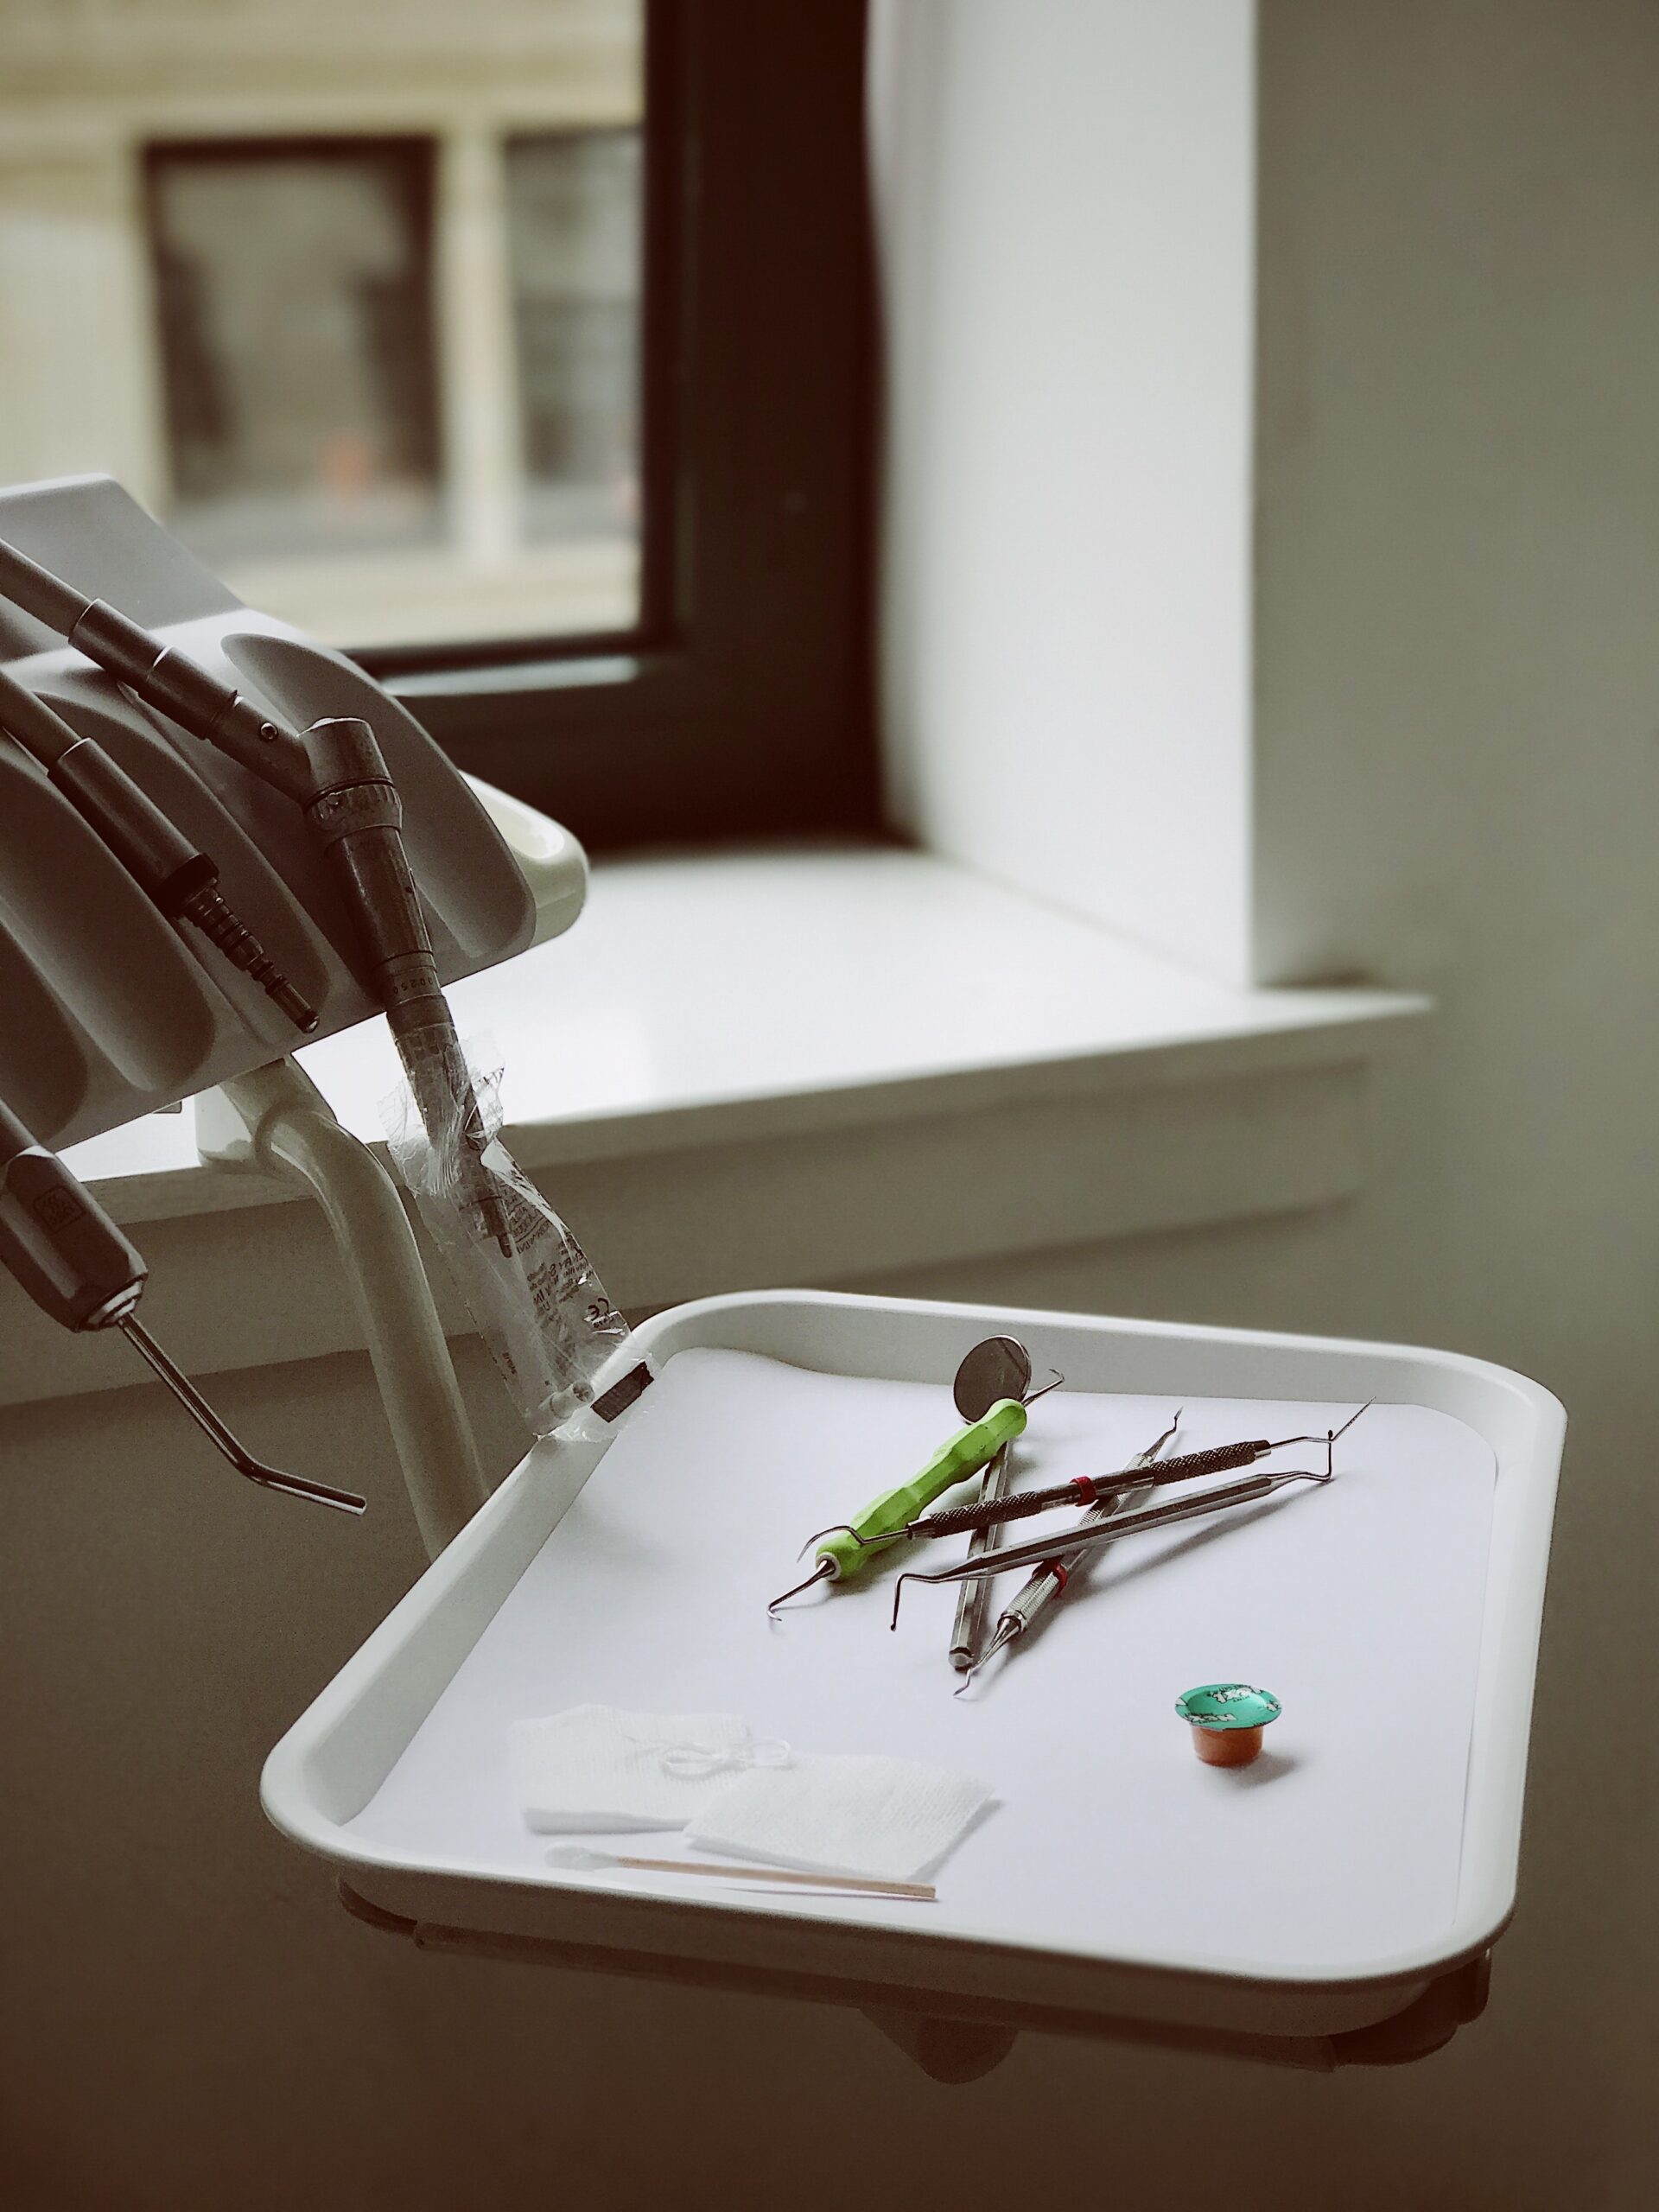 Dental equipment arranged on a tray beside a dentist's chair in a Texas dentistry office, with a window in the background.